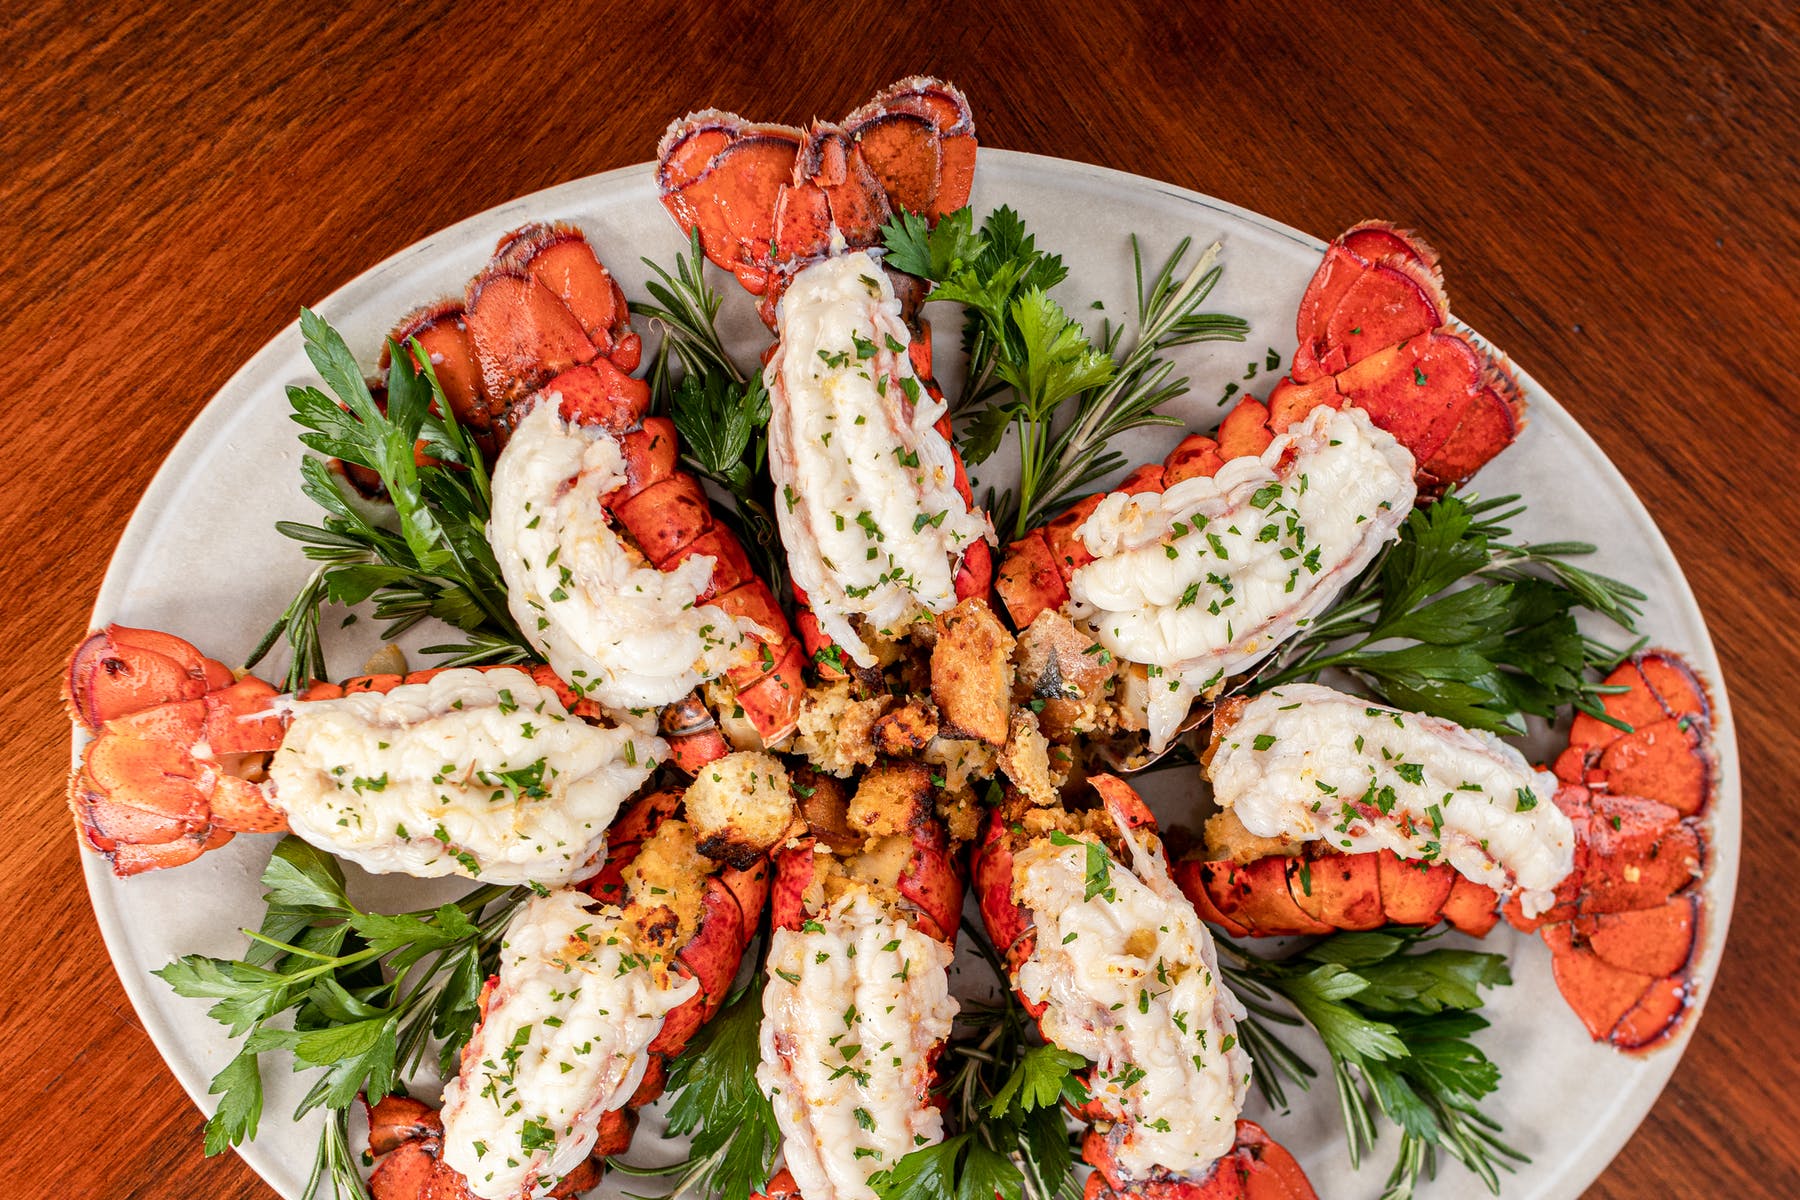 BROILED, STUFFED LOBSTER TAILS WITH SCALLOP STUFFING RECIPE